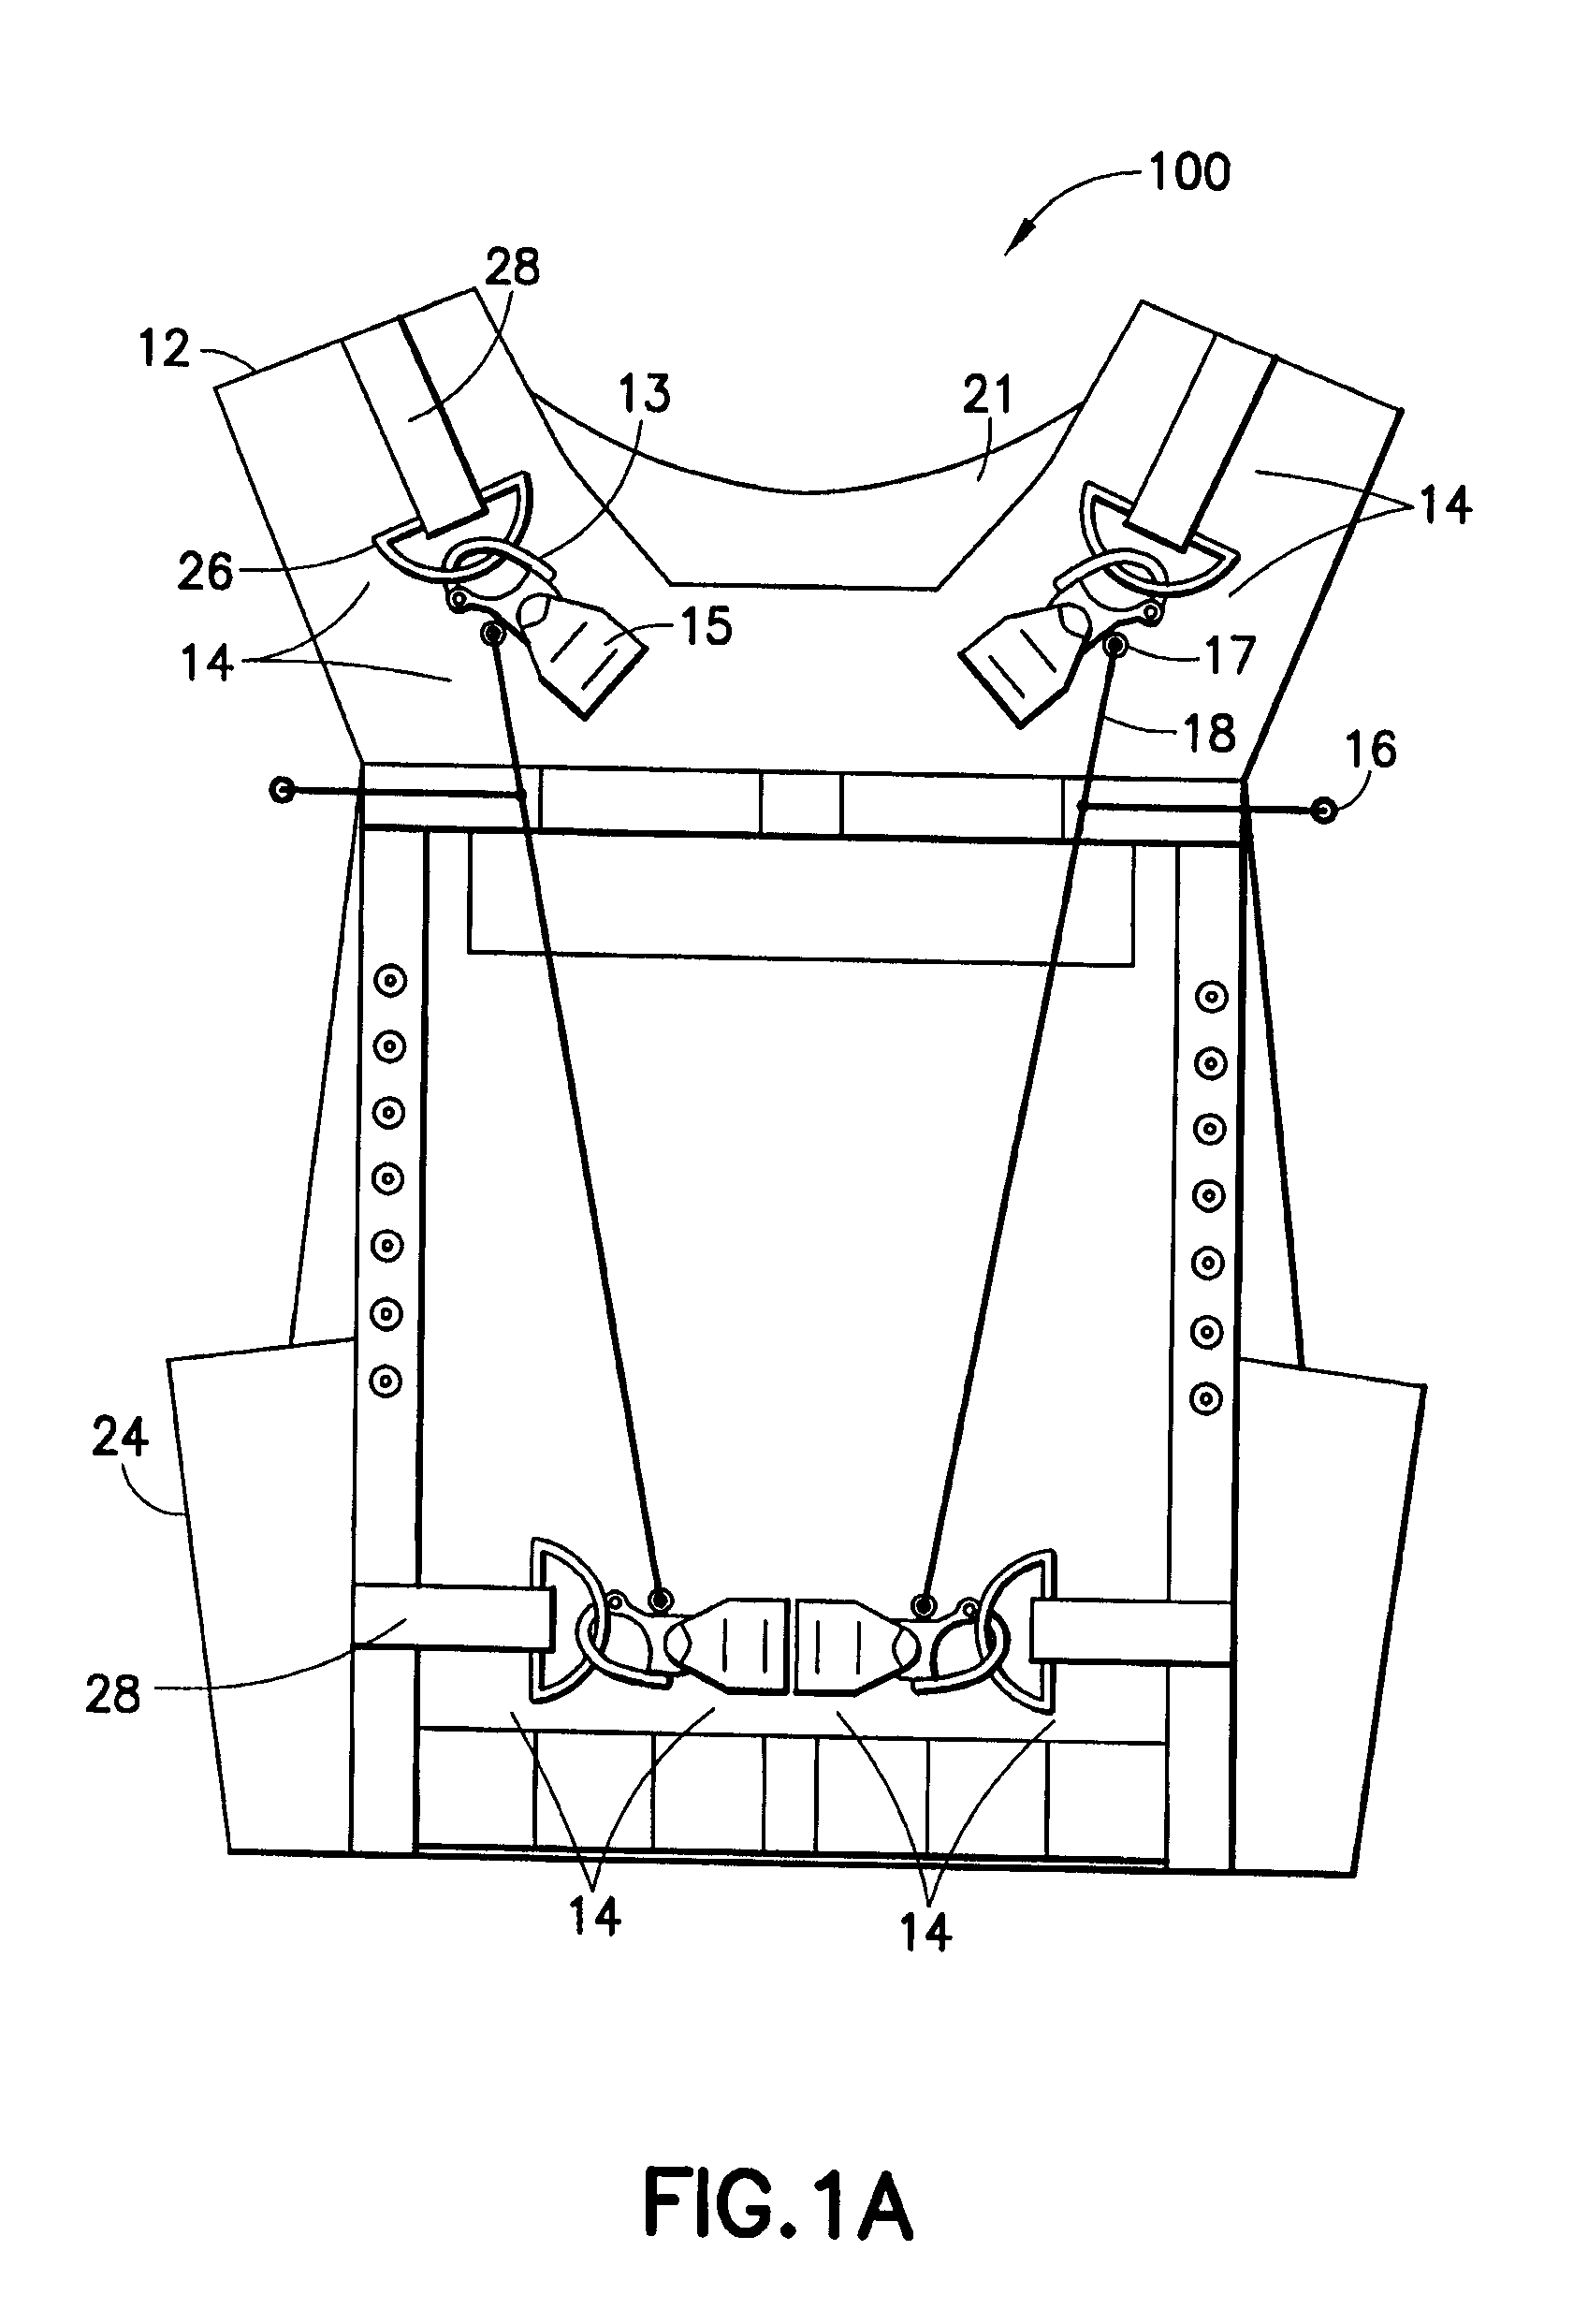 Protective garment having a quick release system